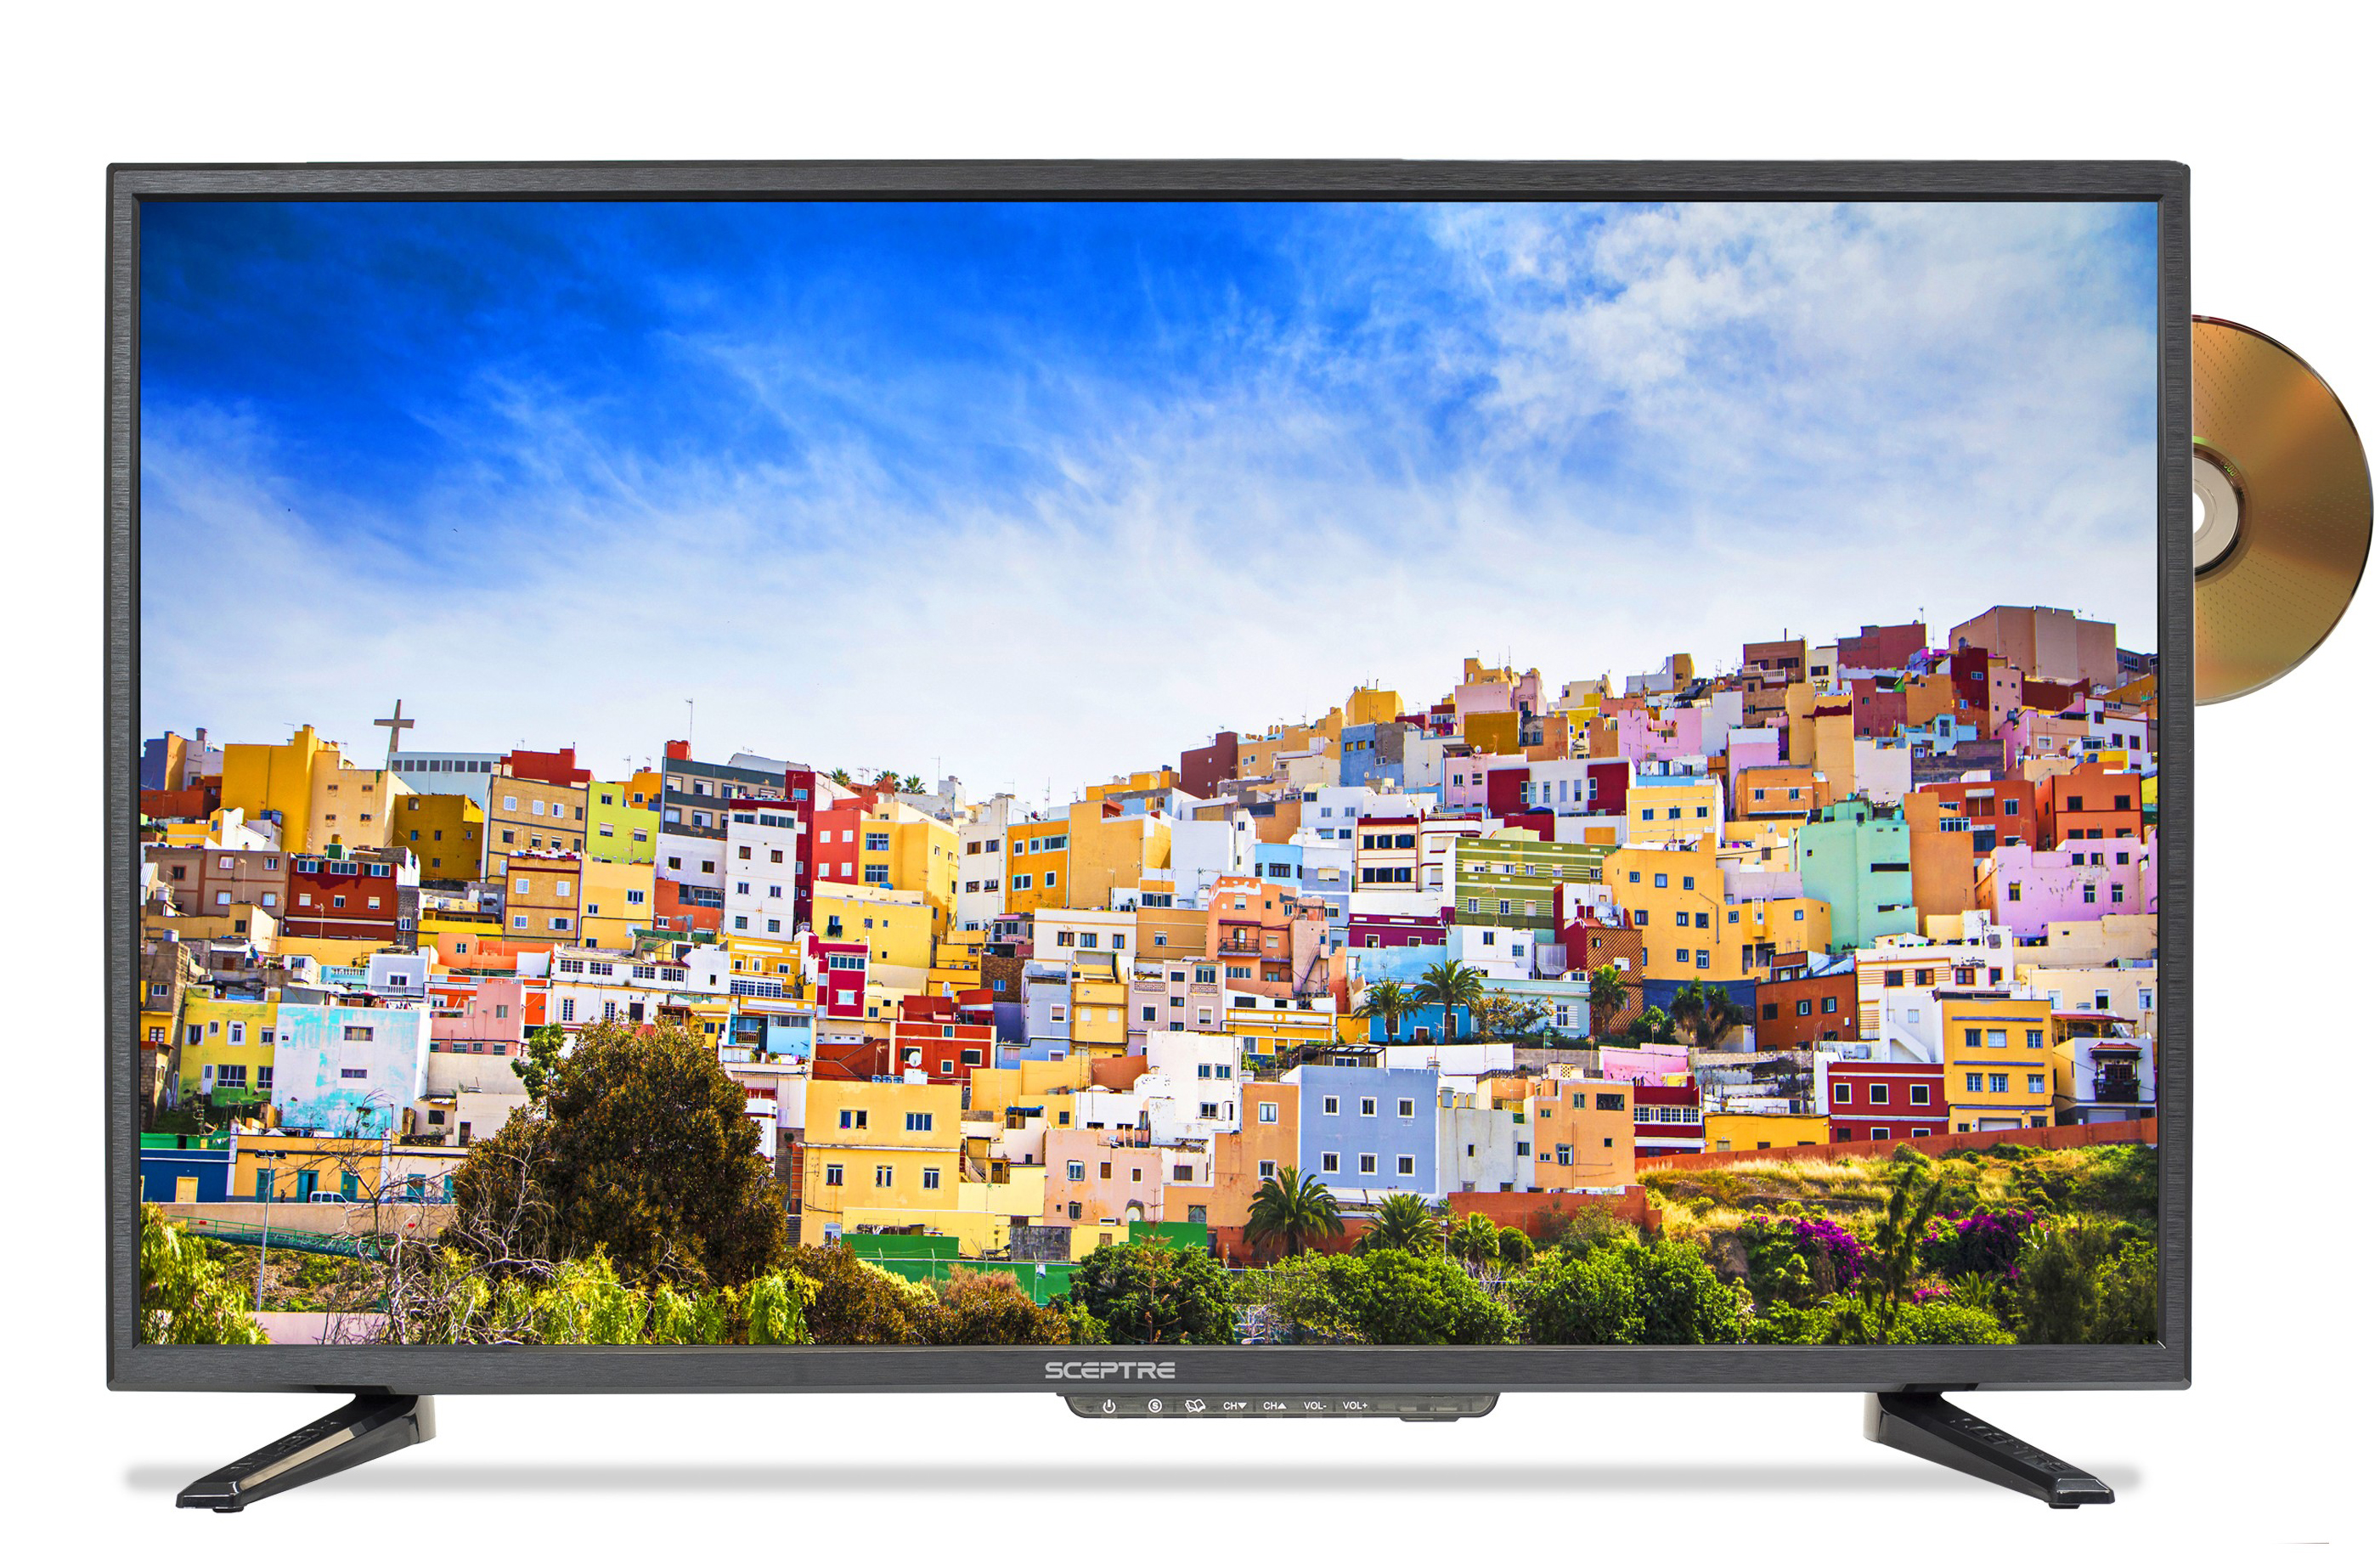 Sceptre 32" Class HD (720P) LED TV (E325BD-S) with Built-in DVD - image 1 of 7